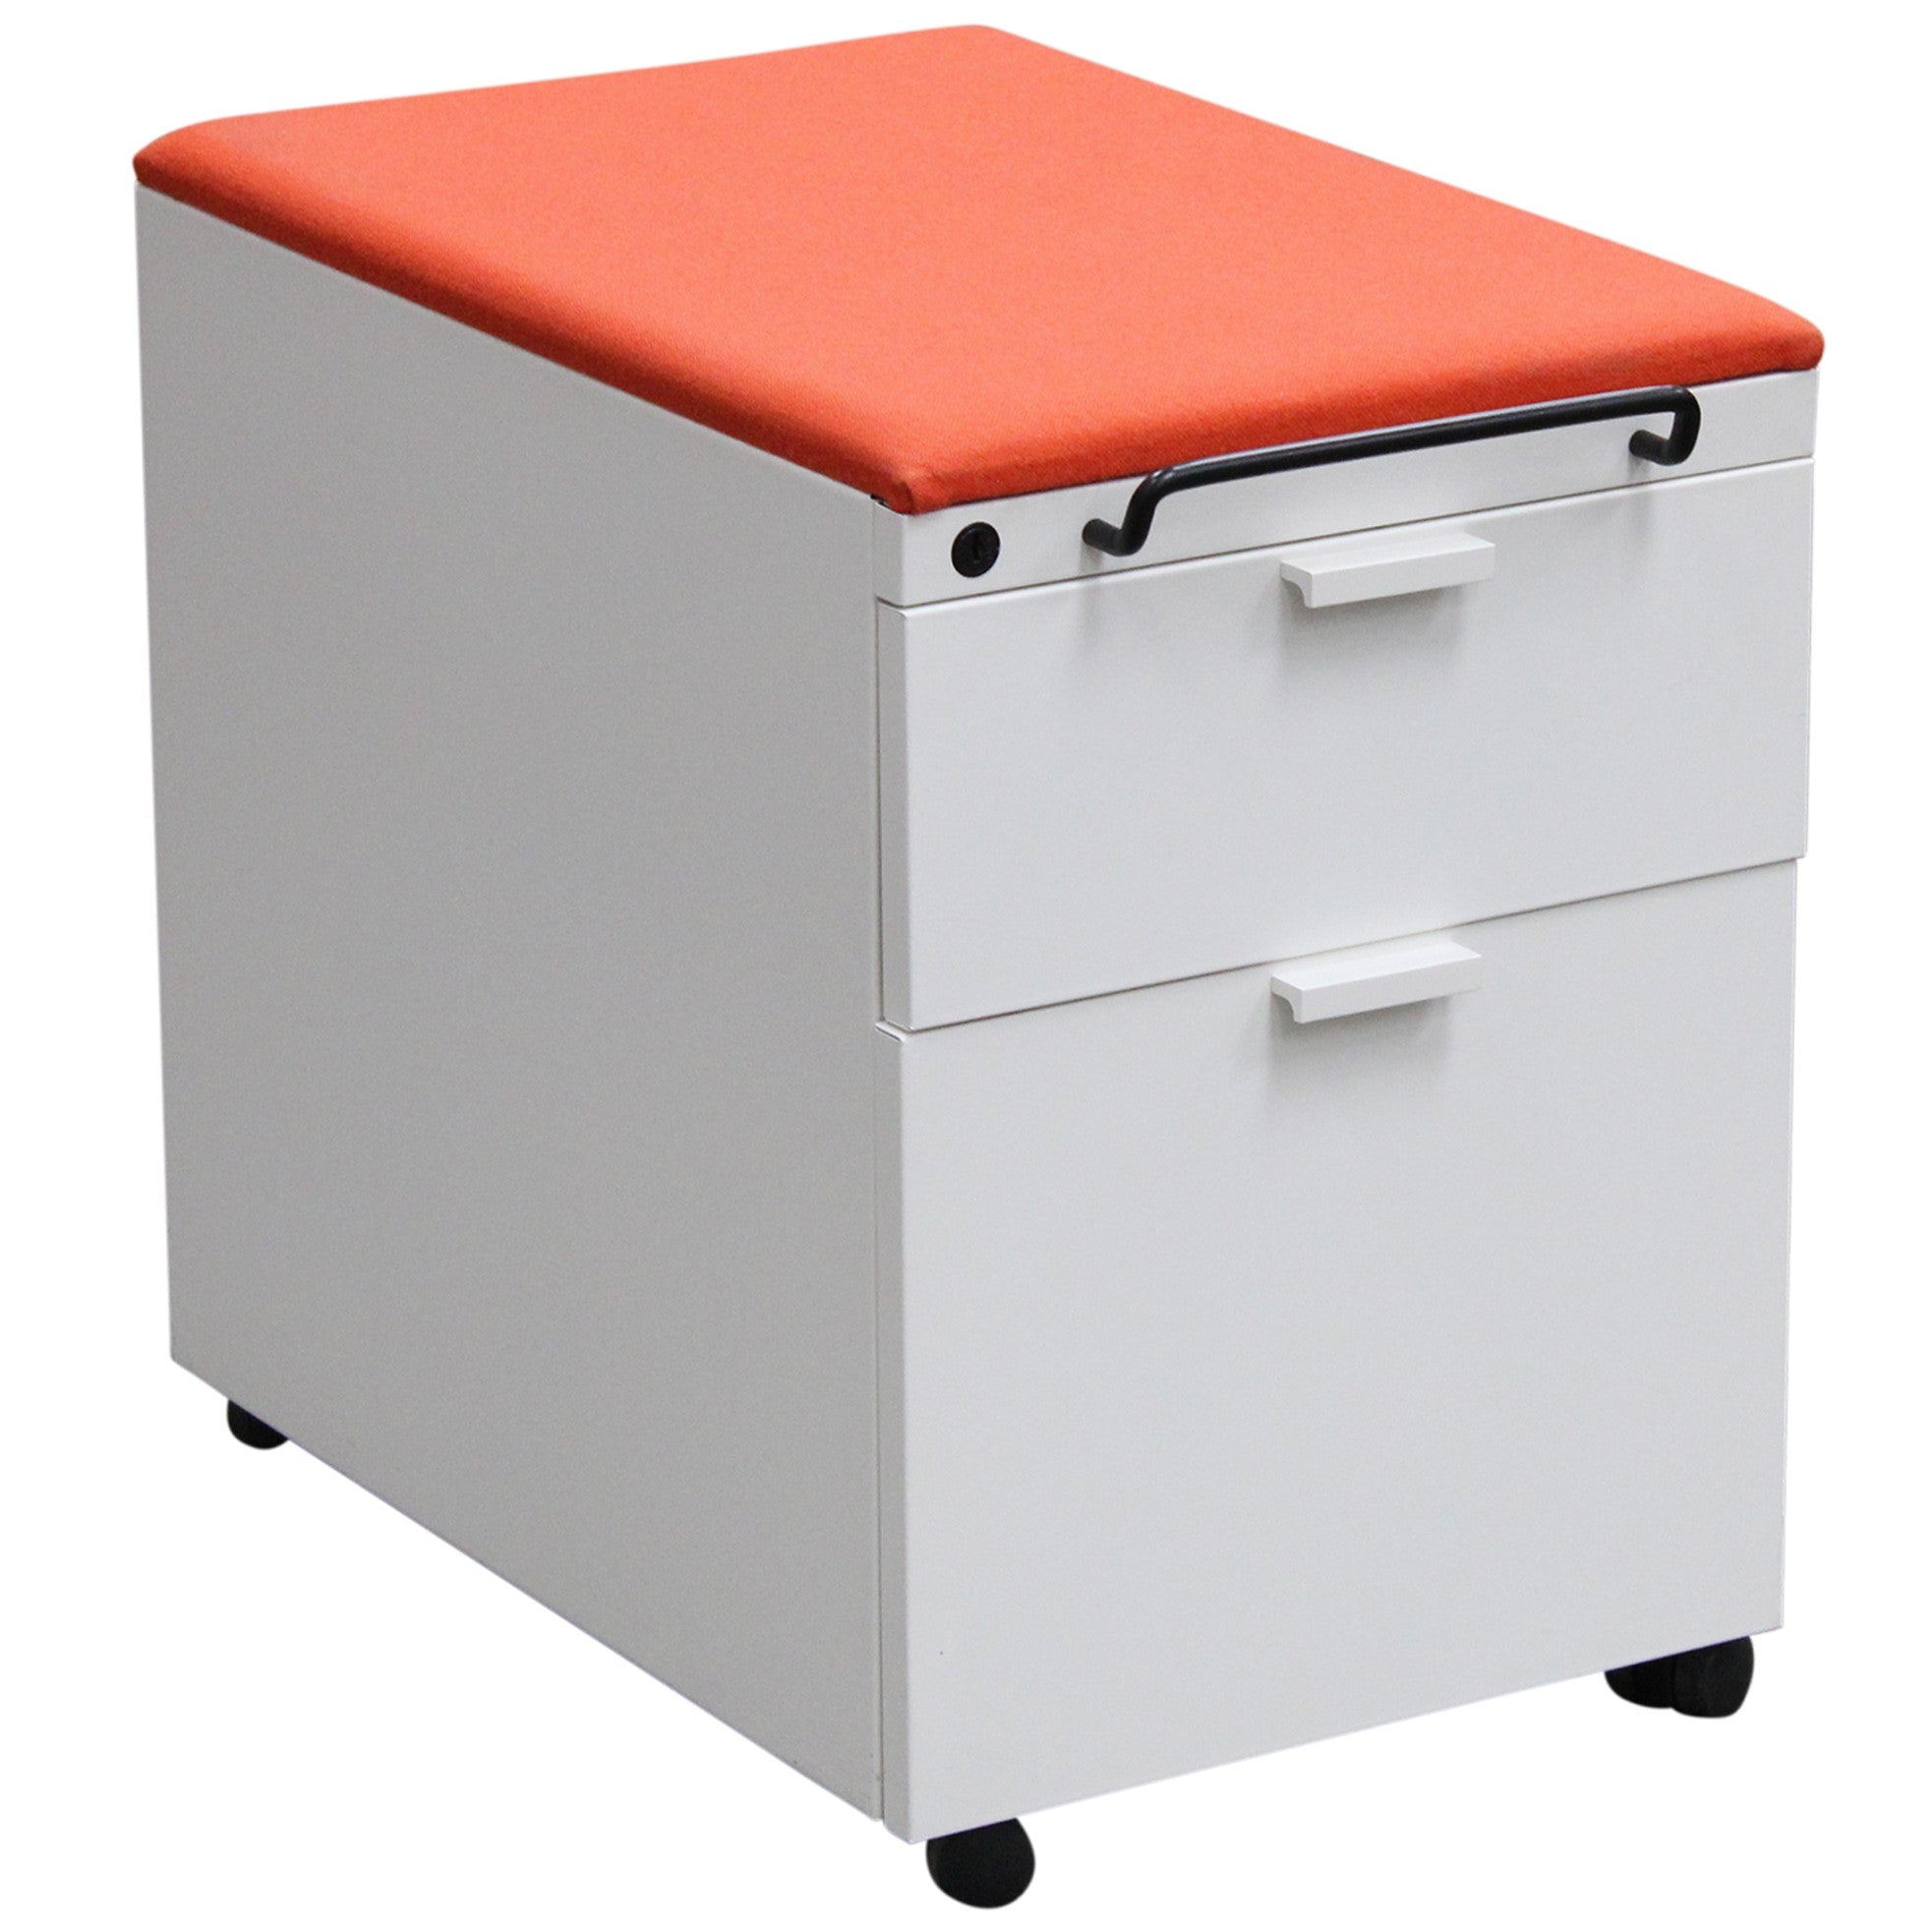 Knoll 2-Drawer Mobile Pedestal with Cushion, White & Red-Orange - Preowned